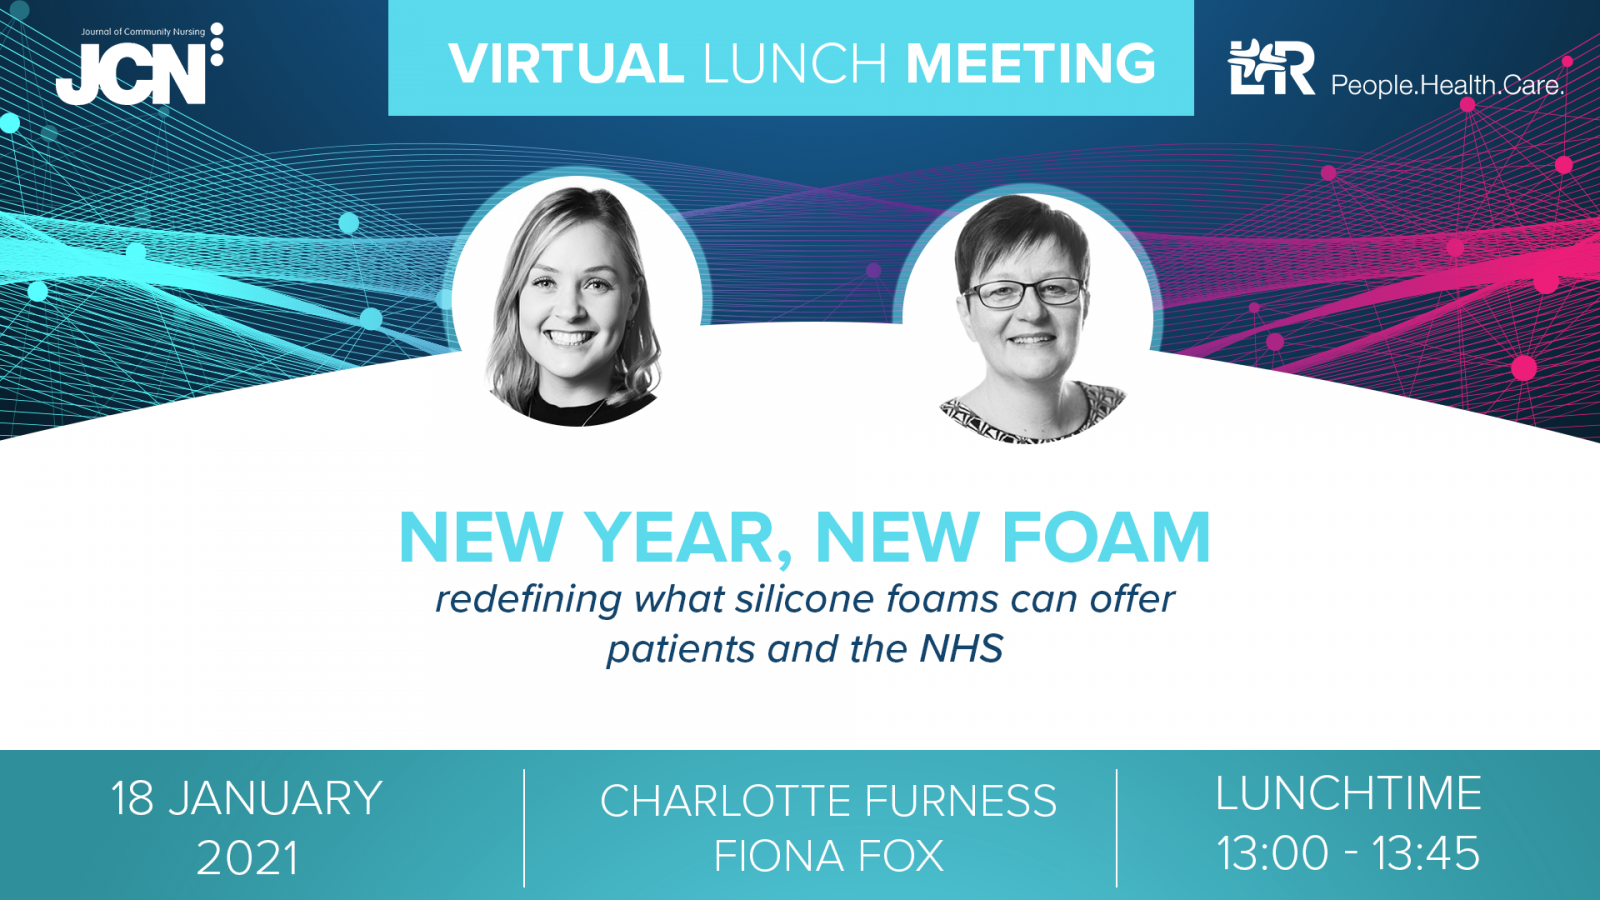 Virtual Lunch Meeting: New Year, New Foam - redefining what silicone foams can offer patients and the NHS - Slides